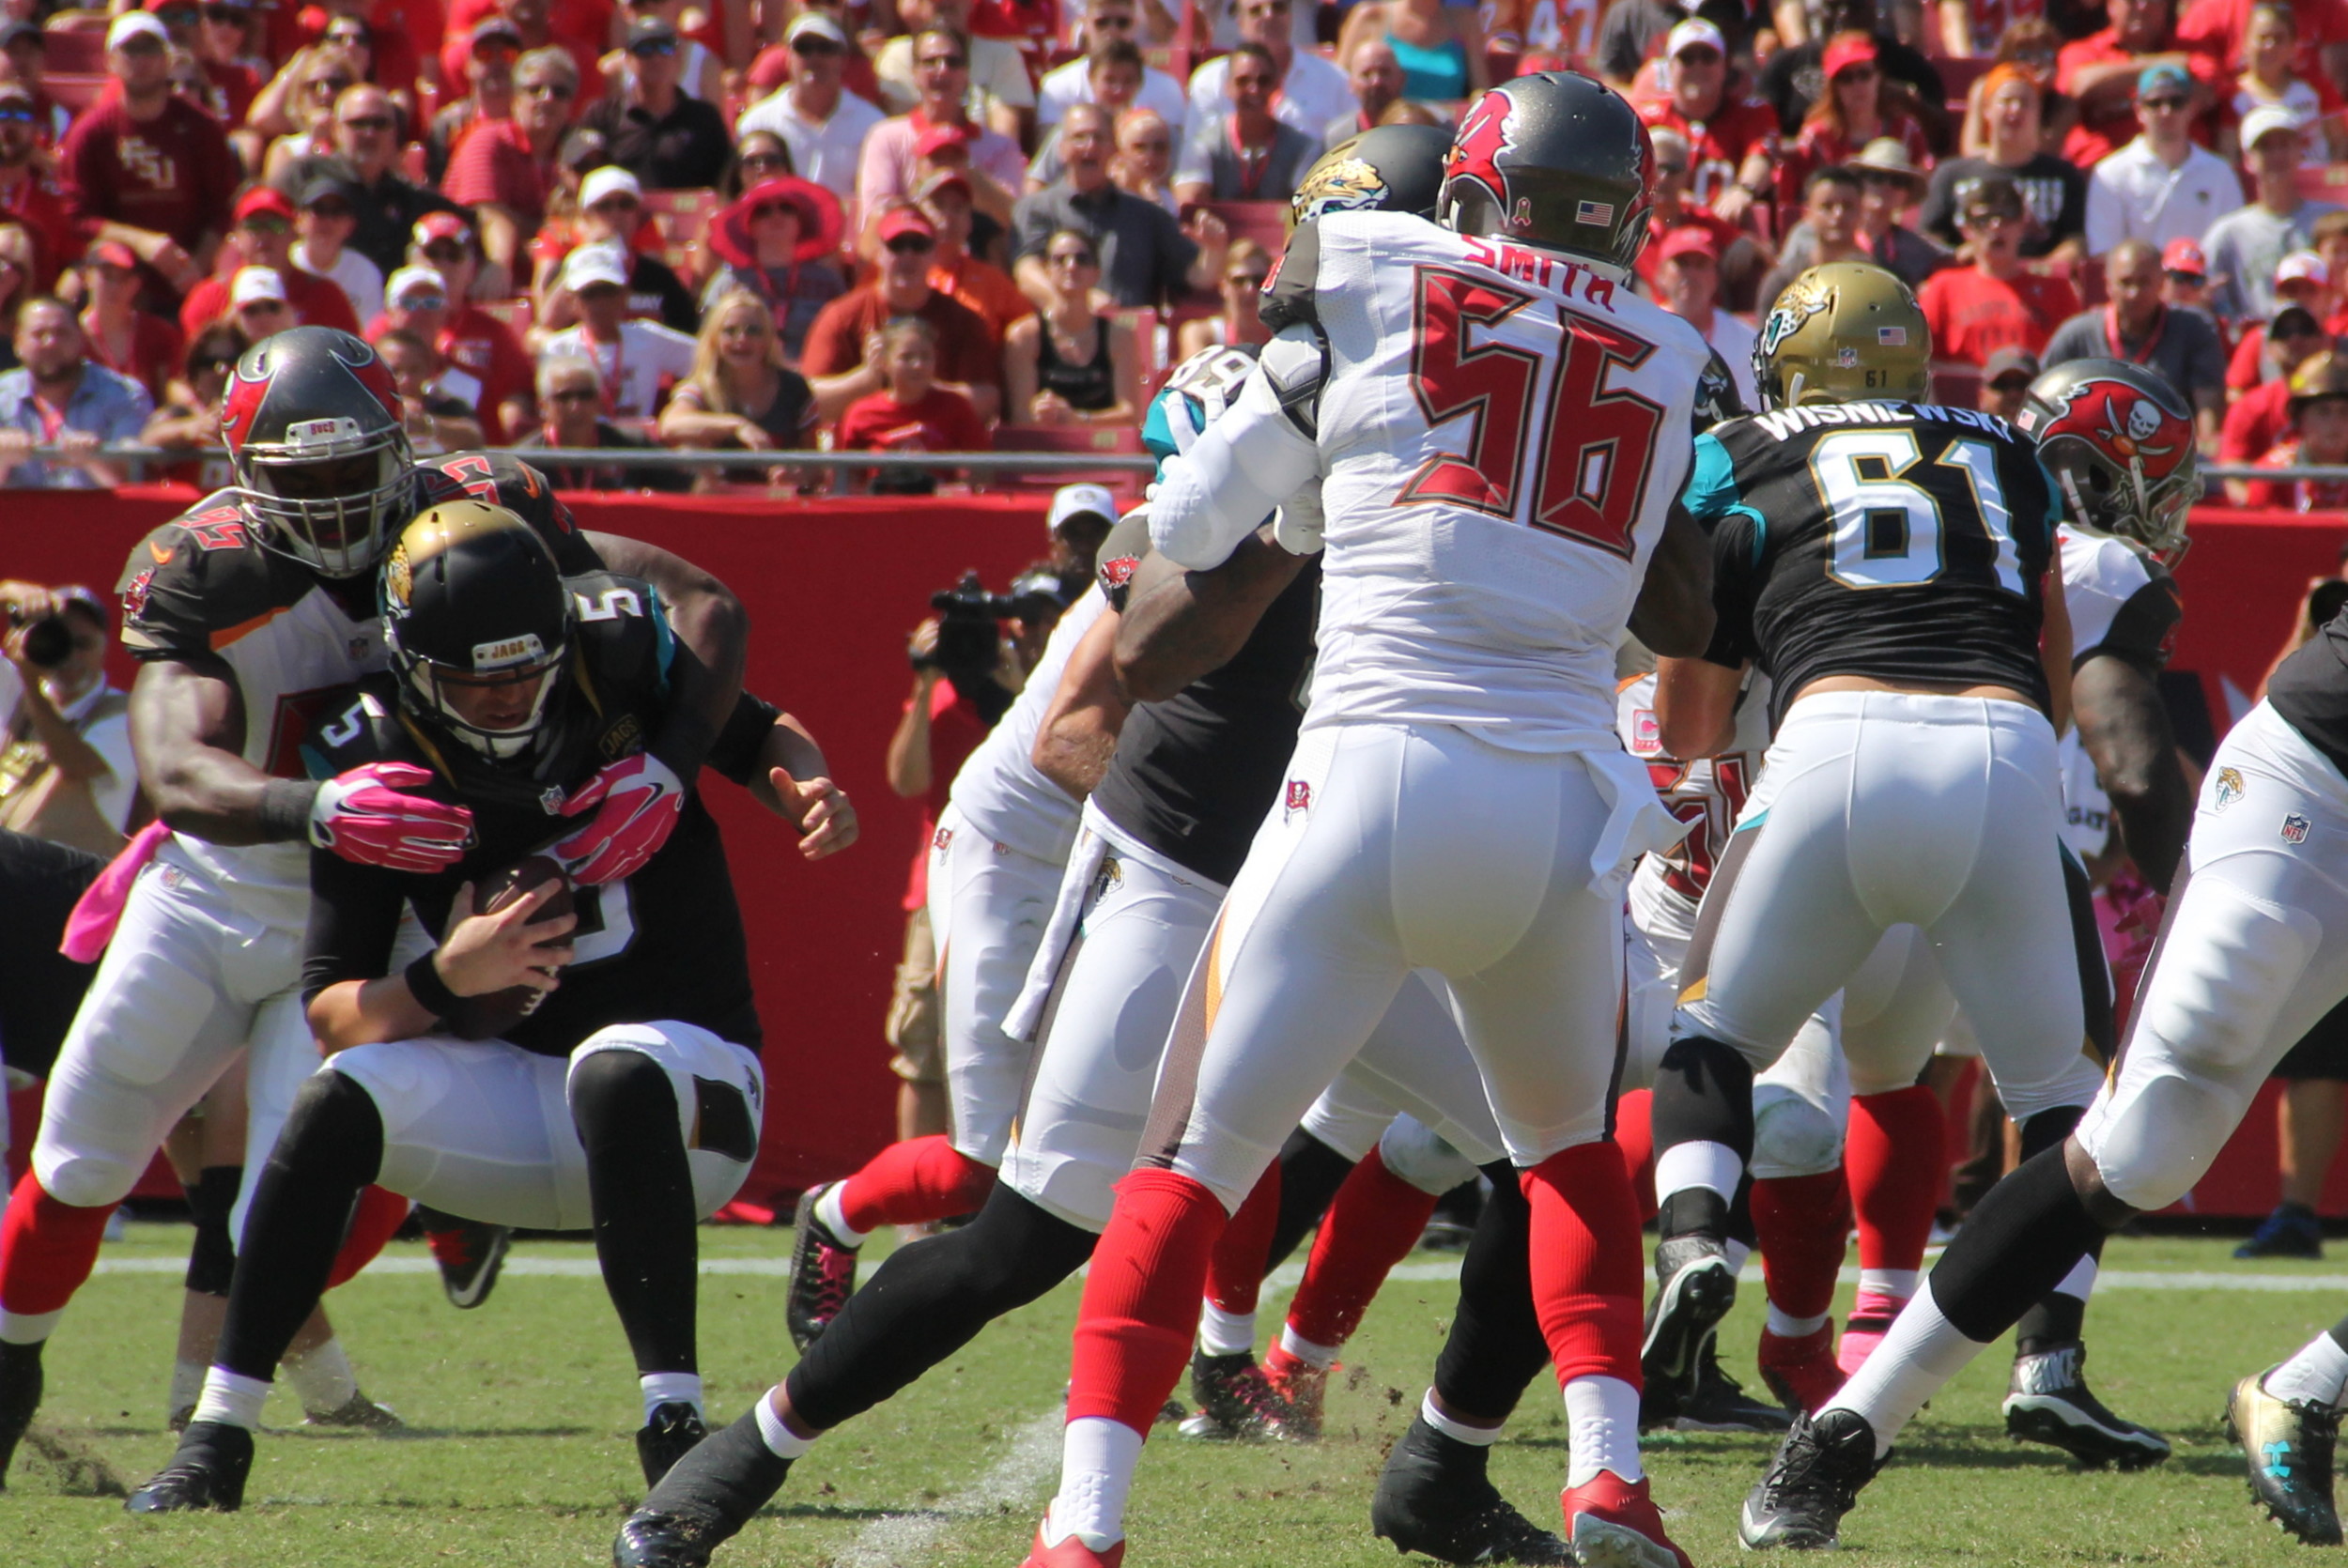 Jacksonville QB Blake Bortles was sacked a season high six times. He sprained his throwing shoulder Sunday in the 38-31 loss to Tampa Bay.